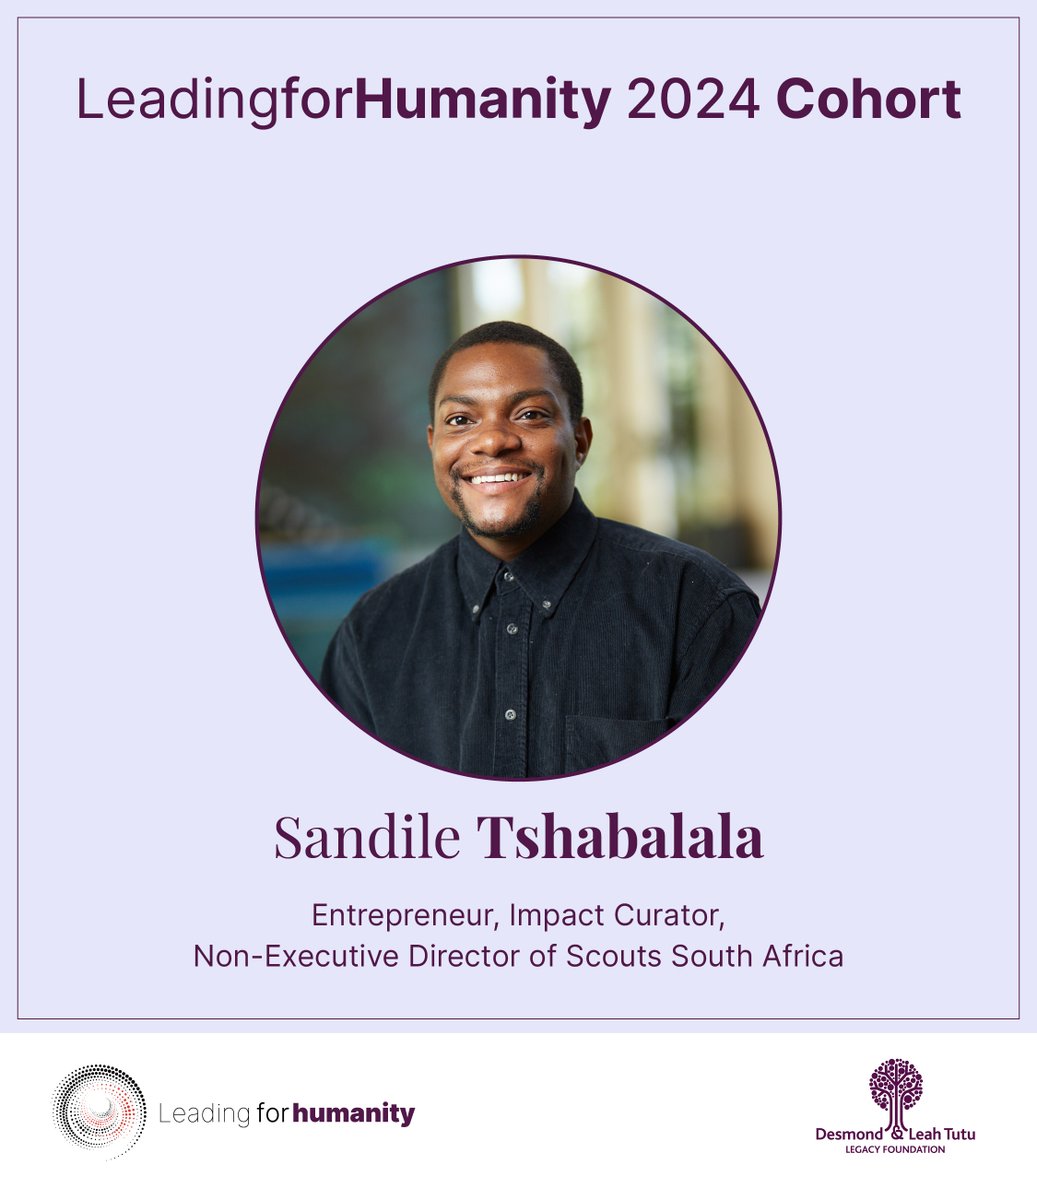 Meet Sandile Tshabalala: Entrepreneur, Impact Curator, Non-Executive Director of Scouts South Africa. With a rich background in governance, philanthropy, and human rights. Listen to his insights on @CapeTalk's Good Morning Cape Town with Lester Kiewit: omny.fm/shows/capetalk…